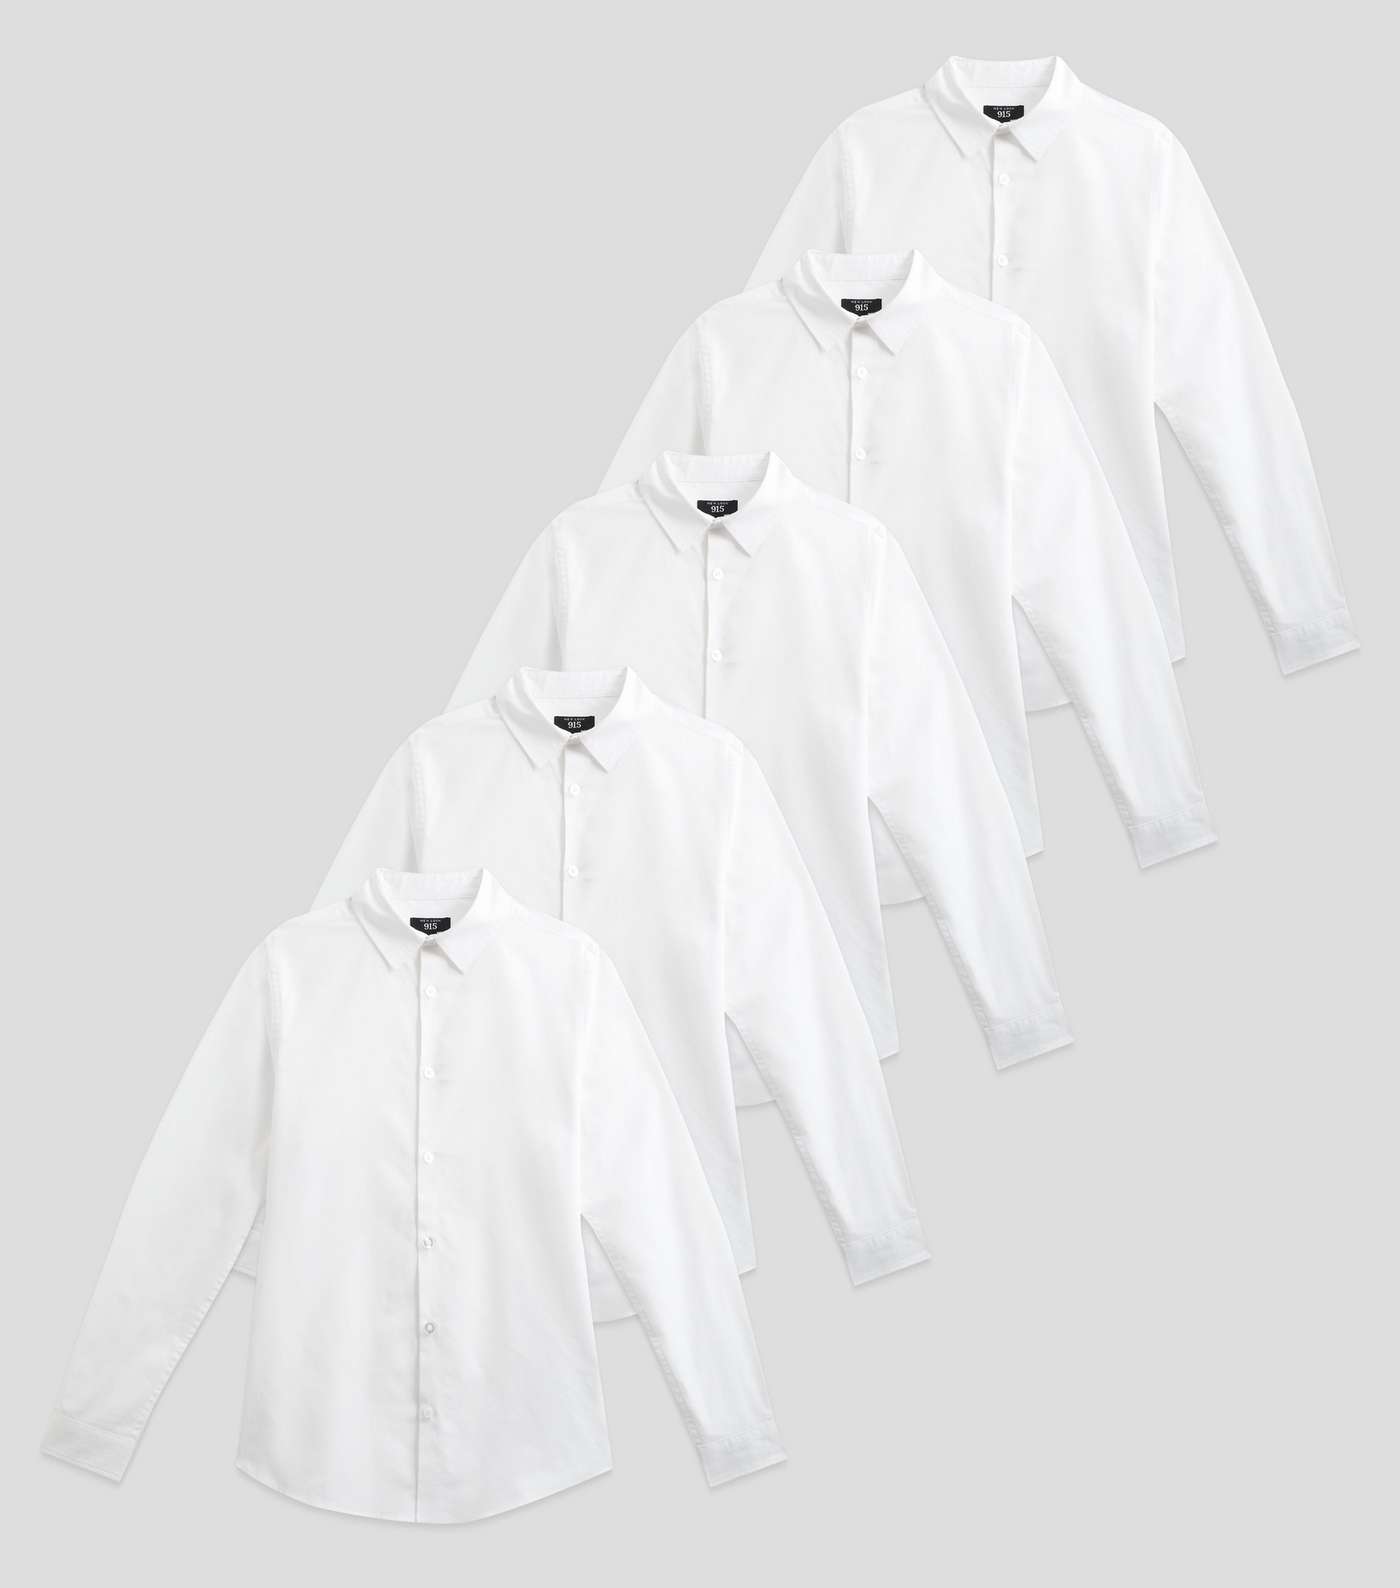 Boys 5 Pack White Collared Long Sleeve Easy Care School Shirts Image 9